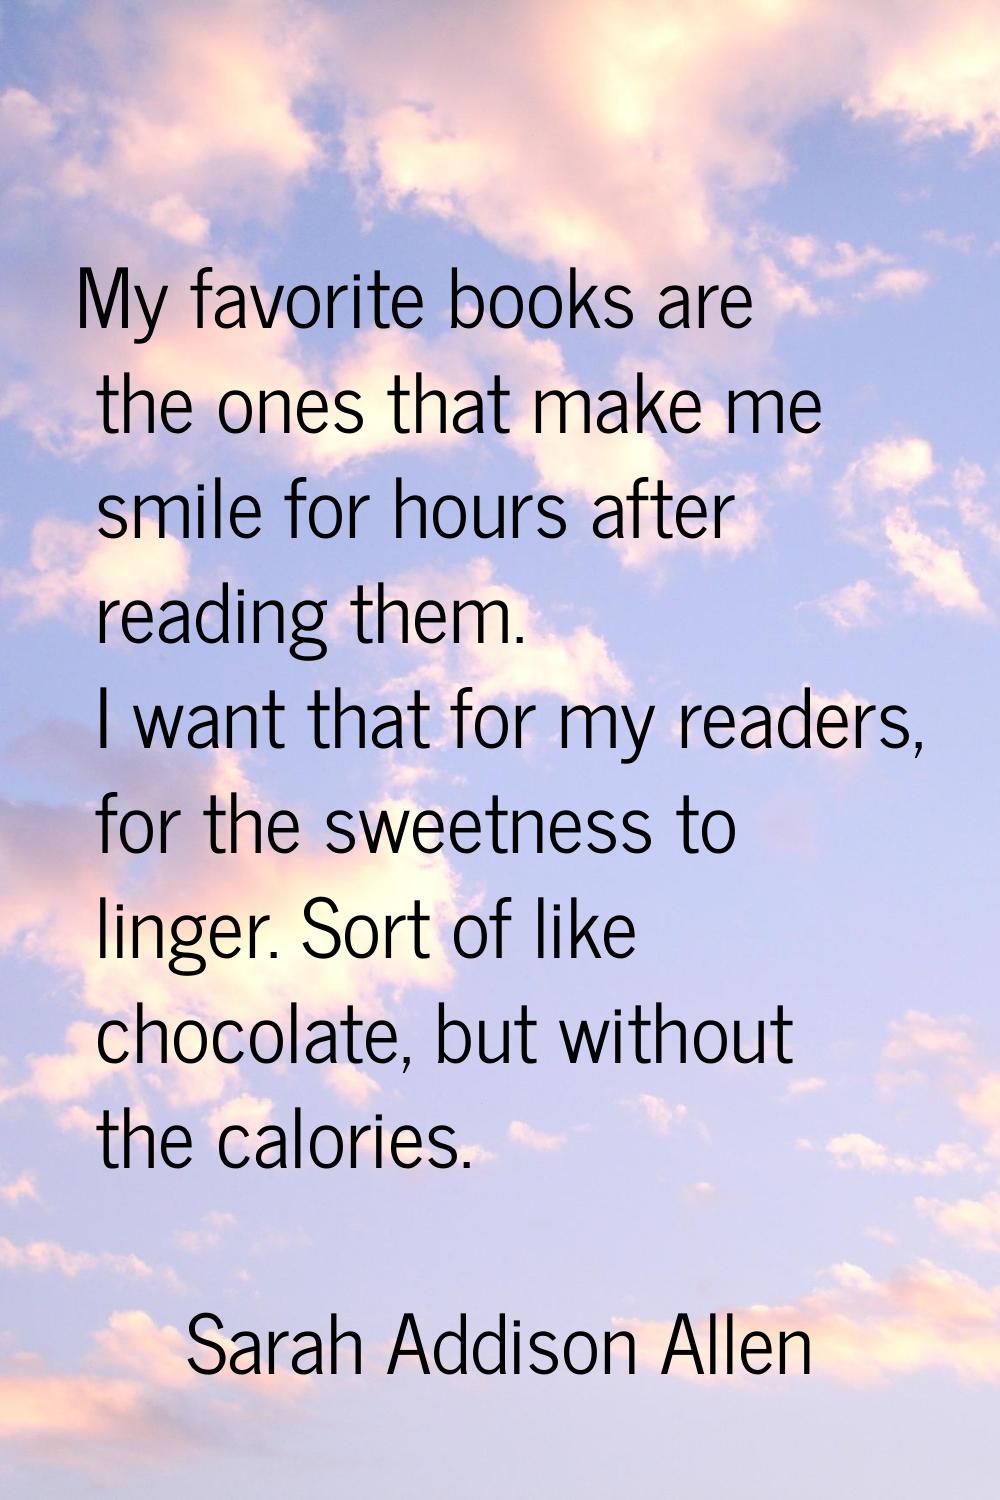 My favorite books are the ones that make me smile for hours after reading them. I want that for my 